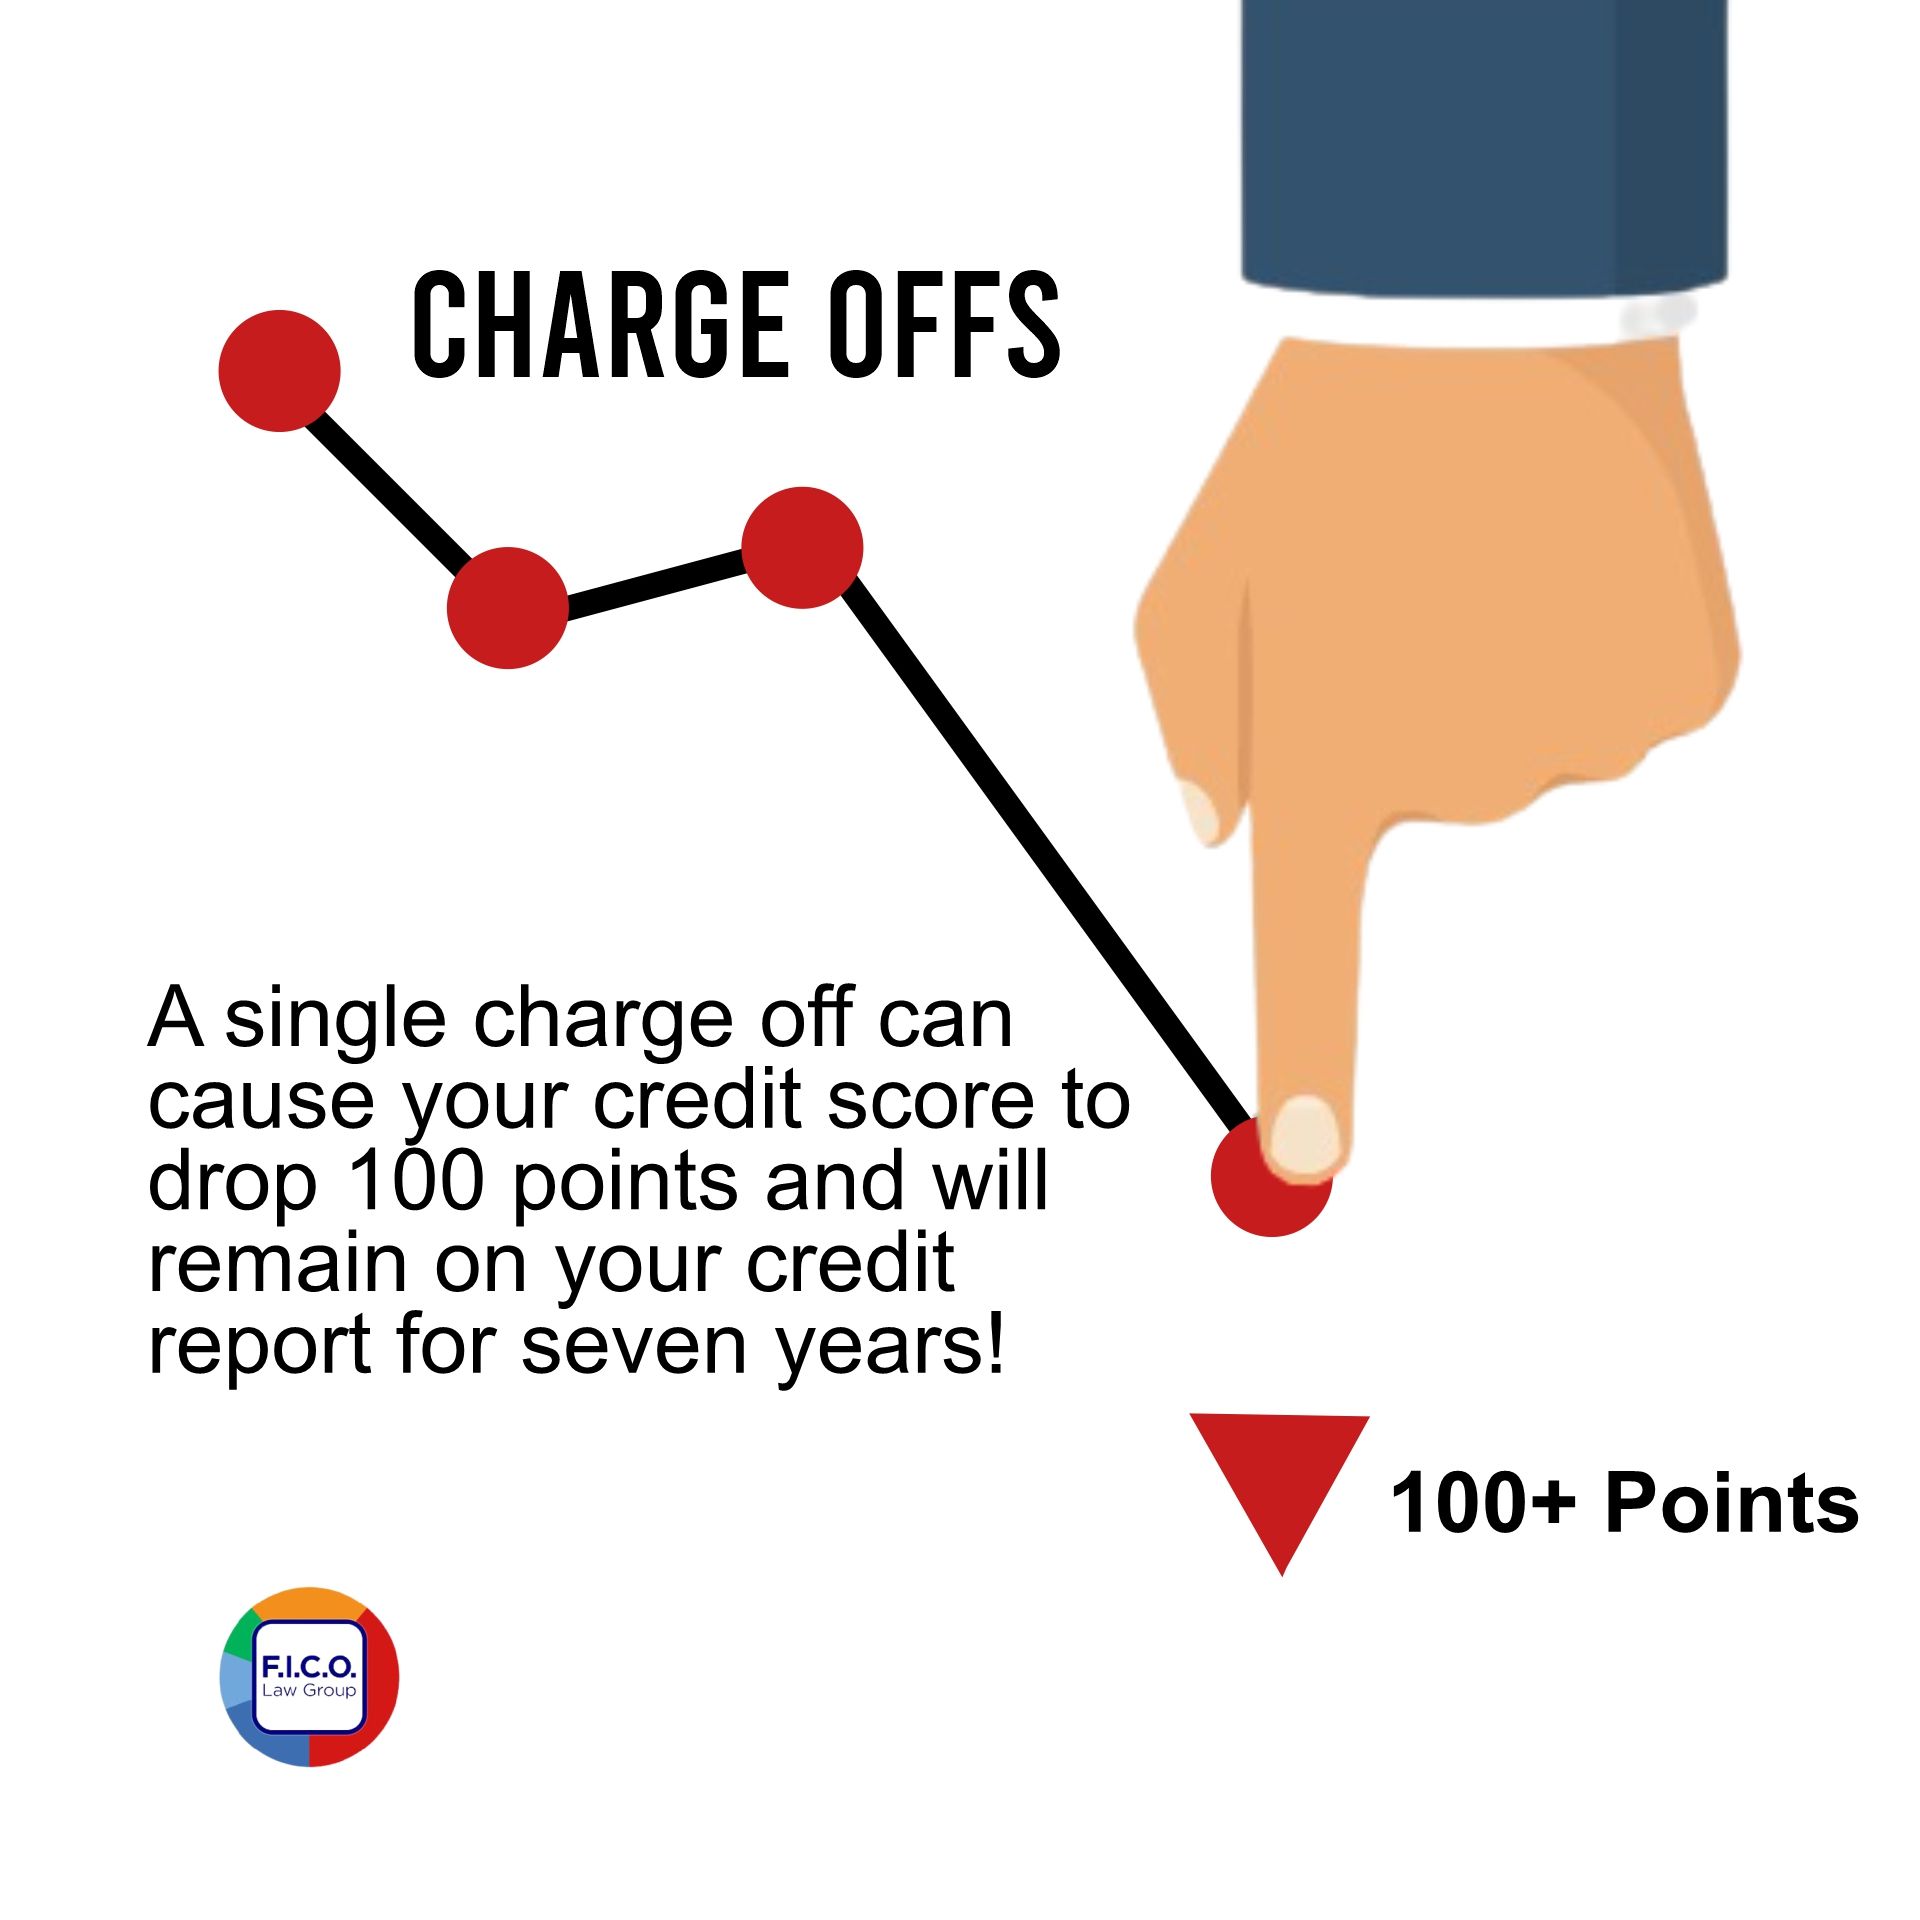 If you have recently pulled your credit report and noticed a charge off ...